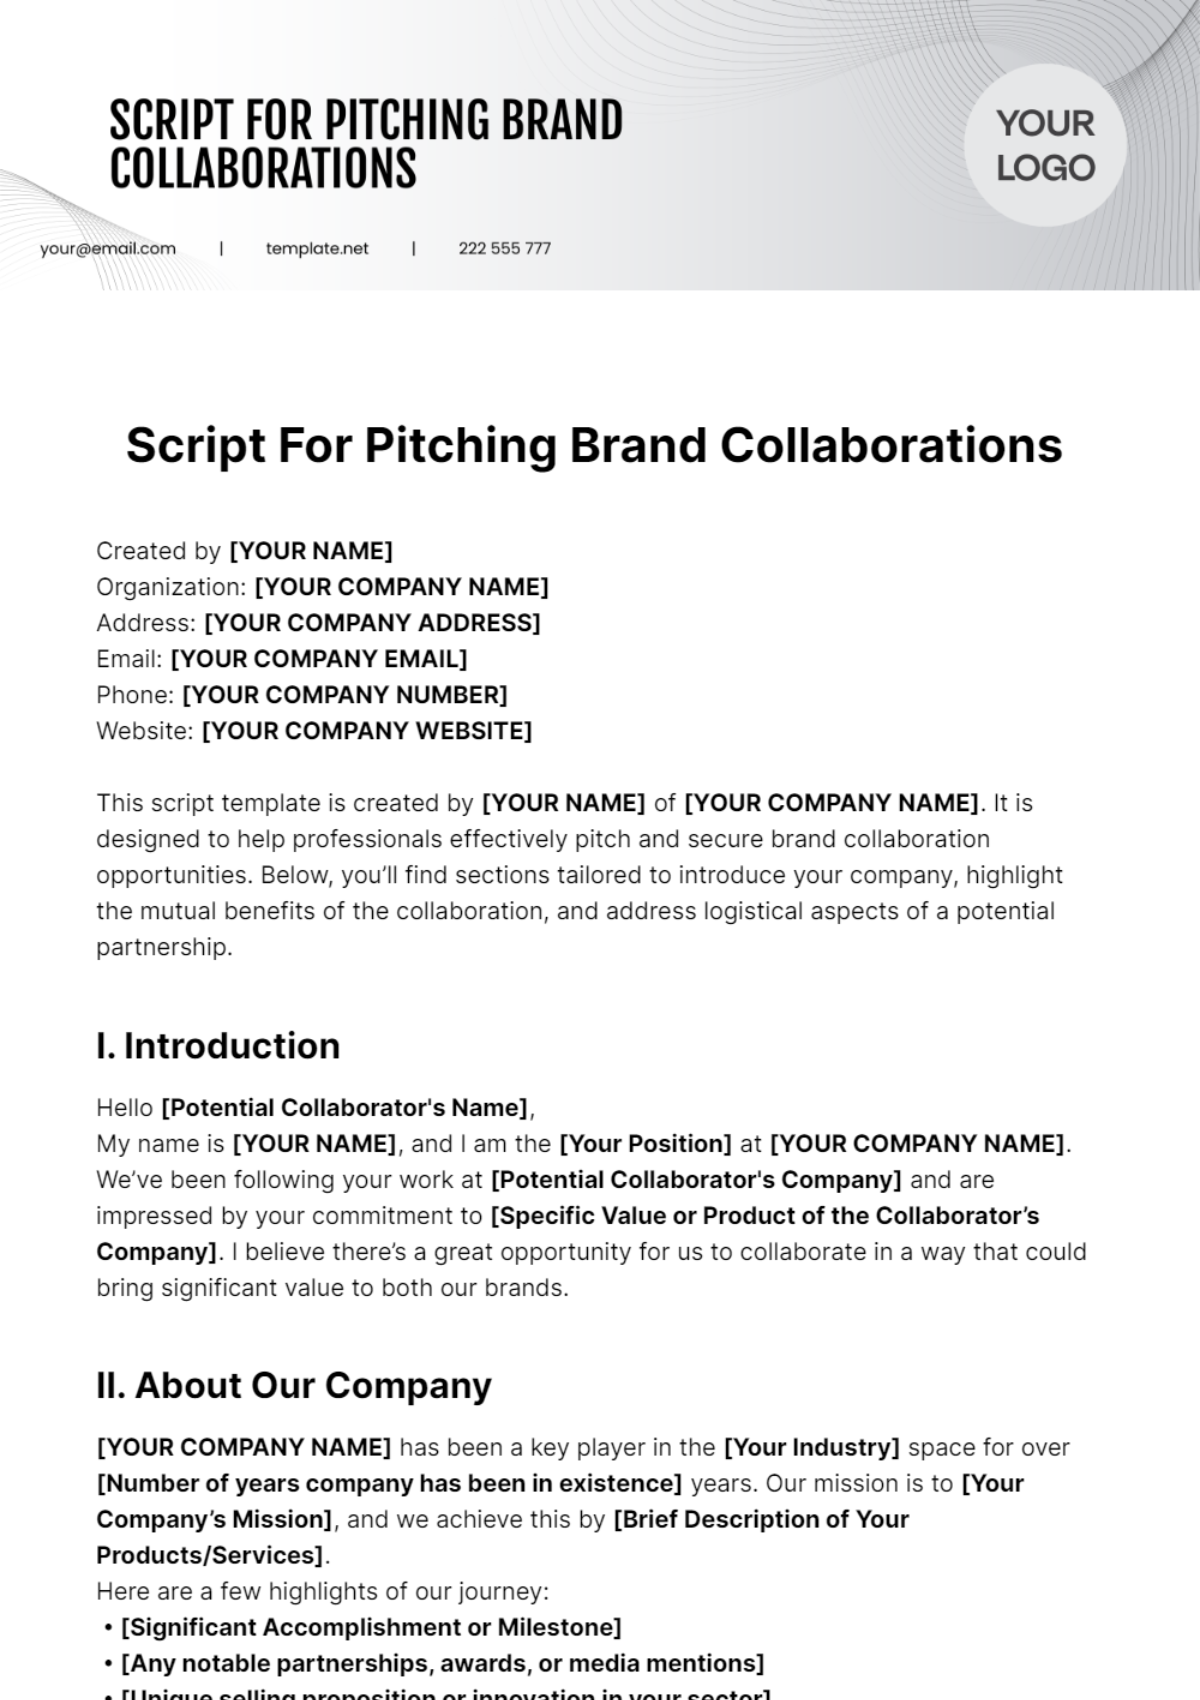 Script For Pitching Brand Collaborations Template